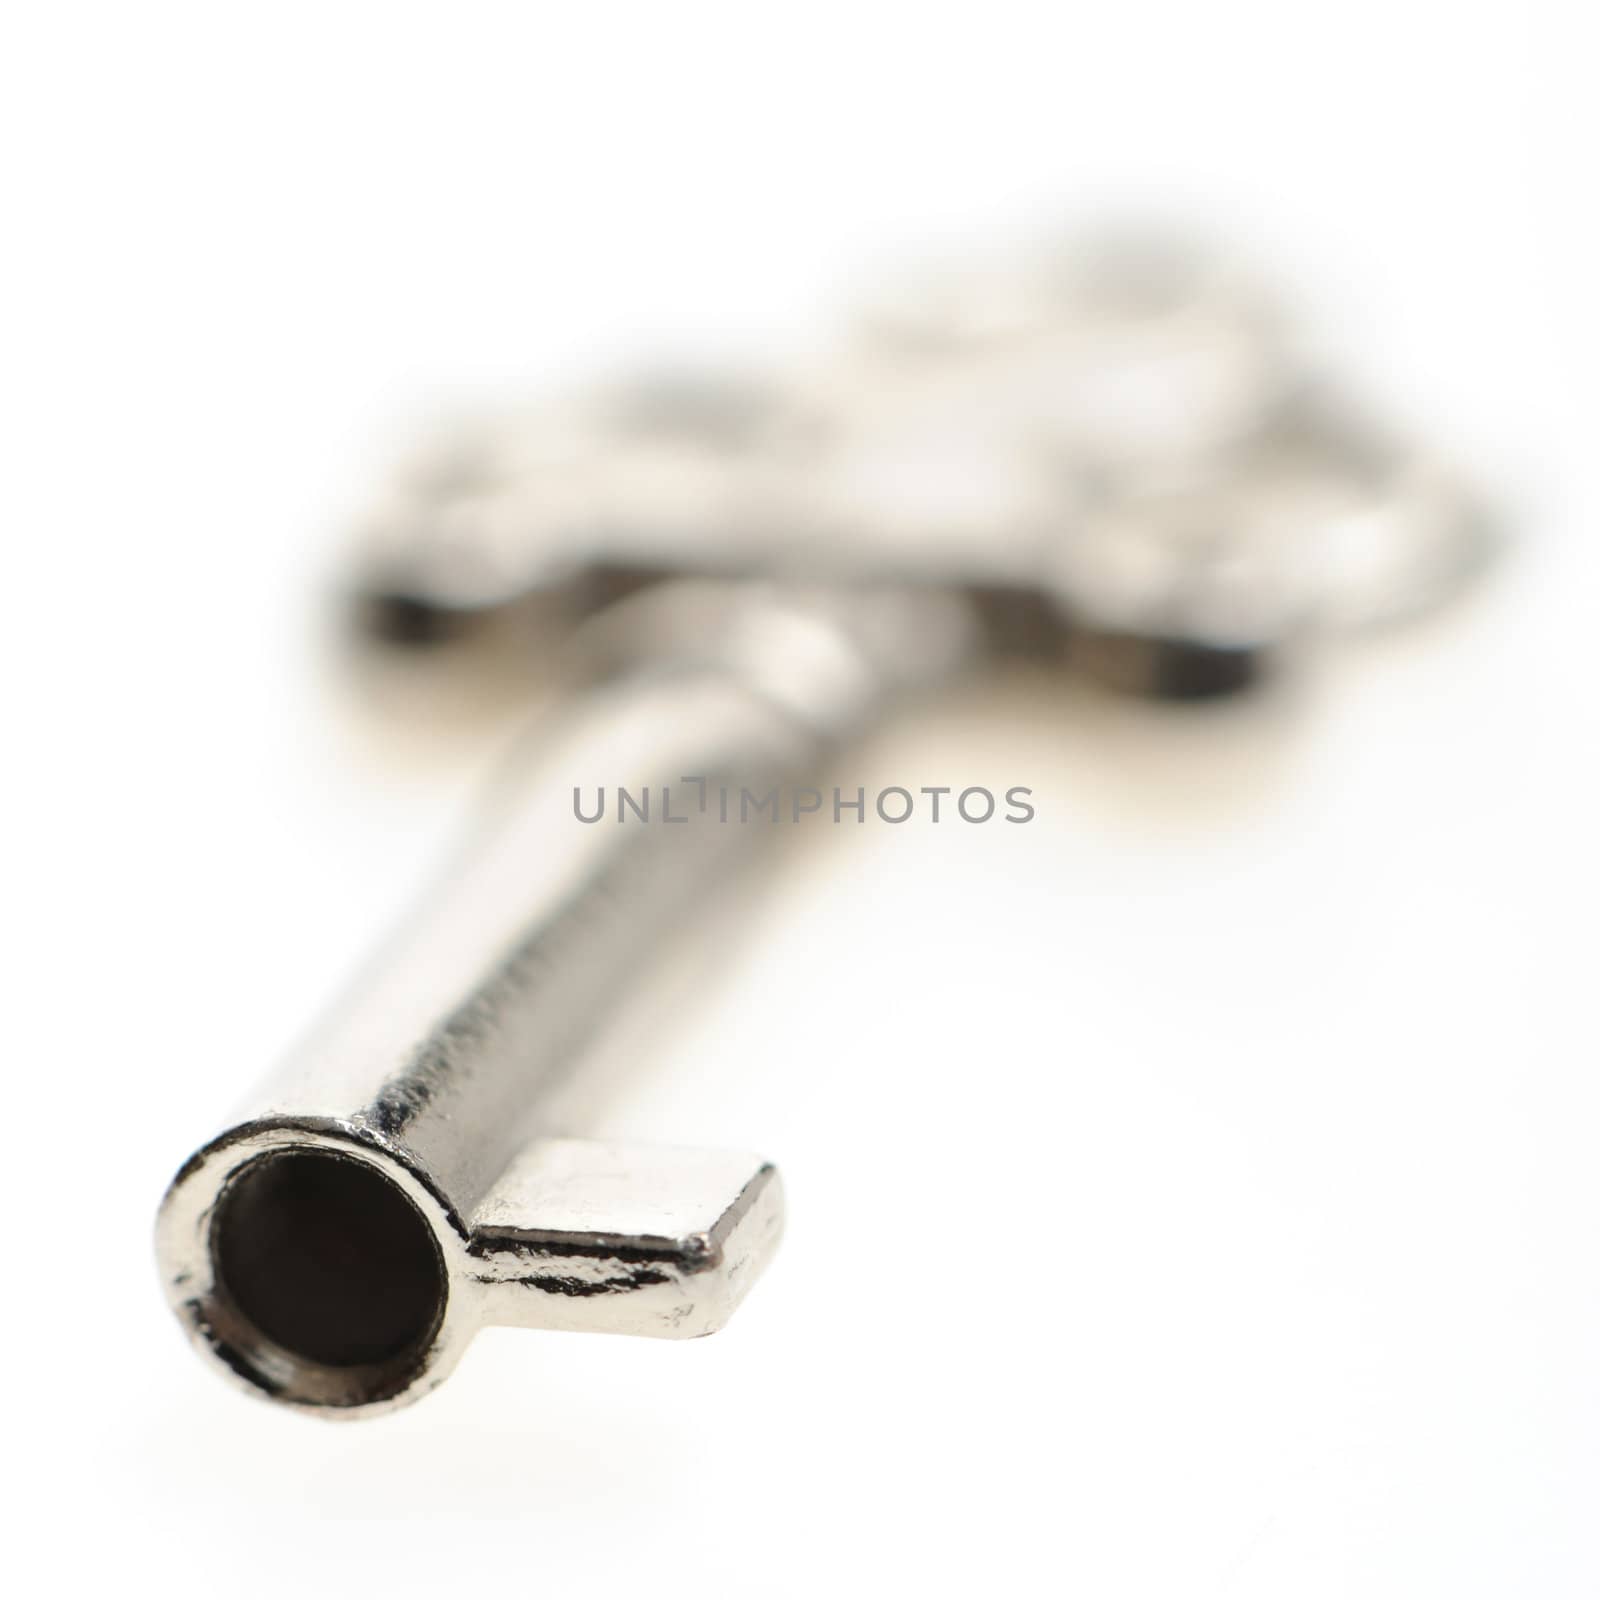 Decorative key. An iron key from the lock isolated on a white background